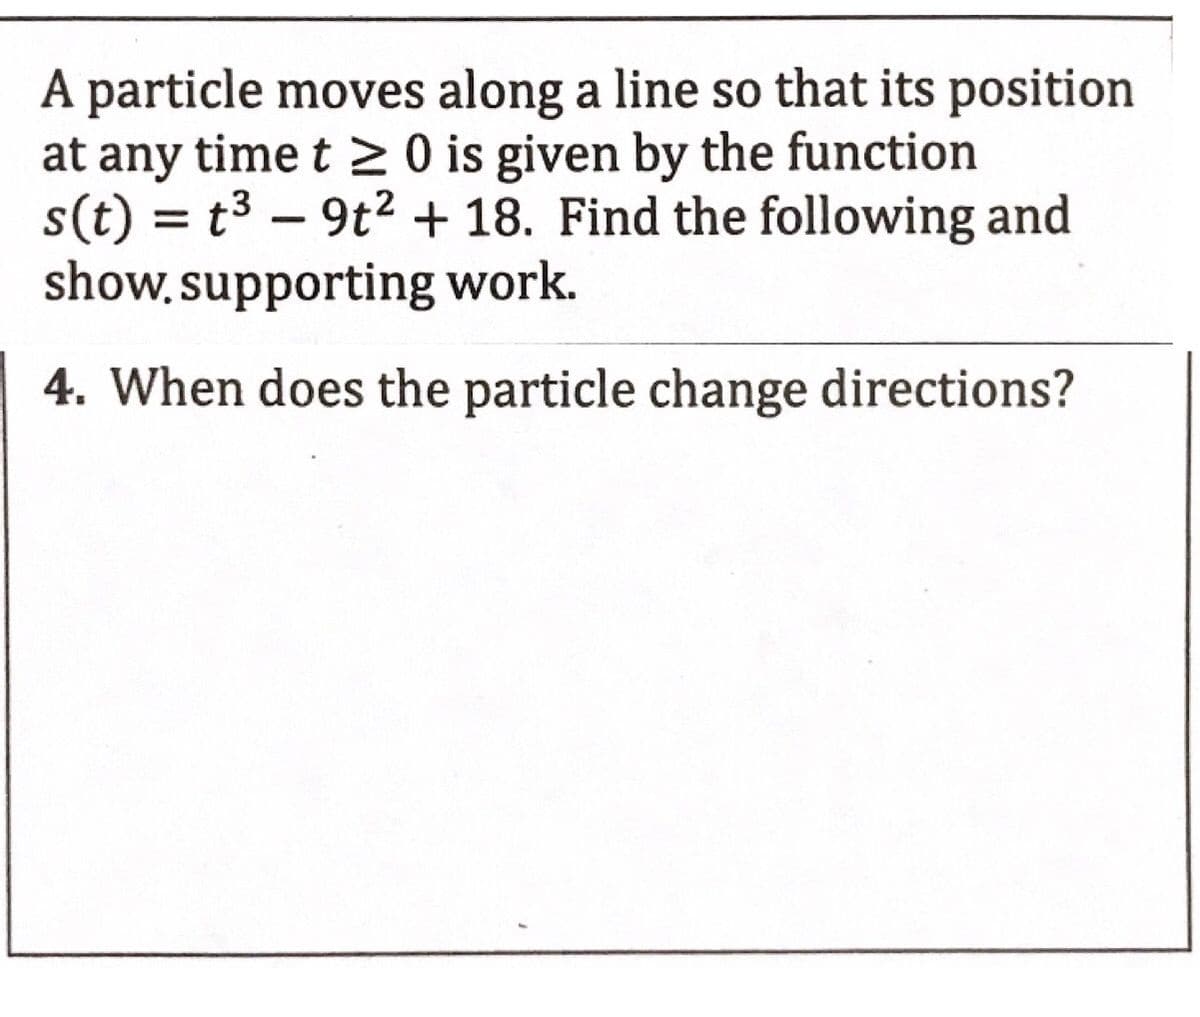 A particle moves along a line so that its position
at any time t > 0 is given by the function
s(t) = t3 – 9t2 + 18. Find the following and
show, supporting work.
-
4. When does the particle change directions?
